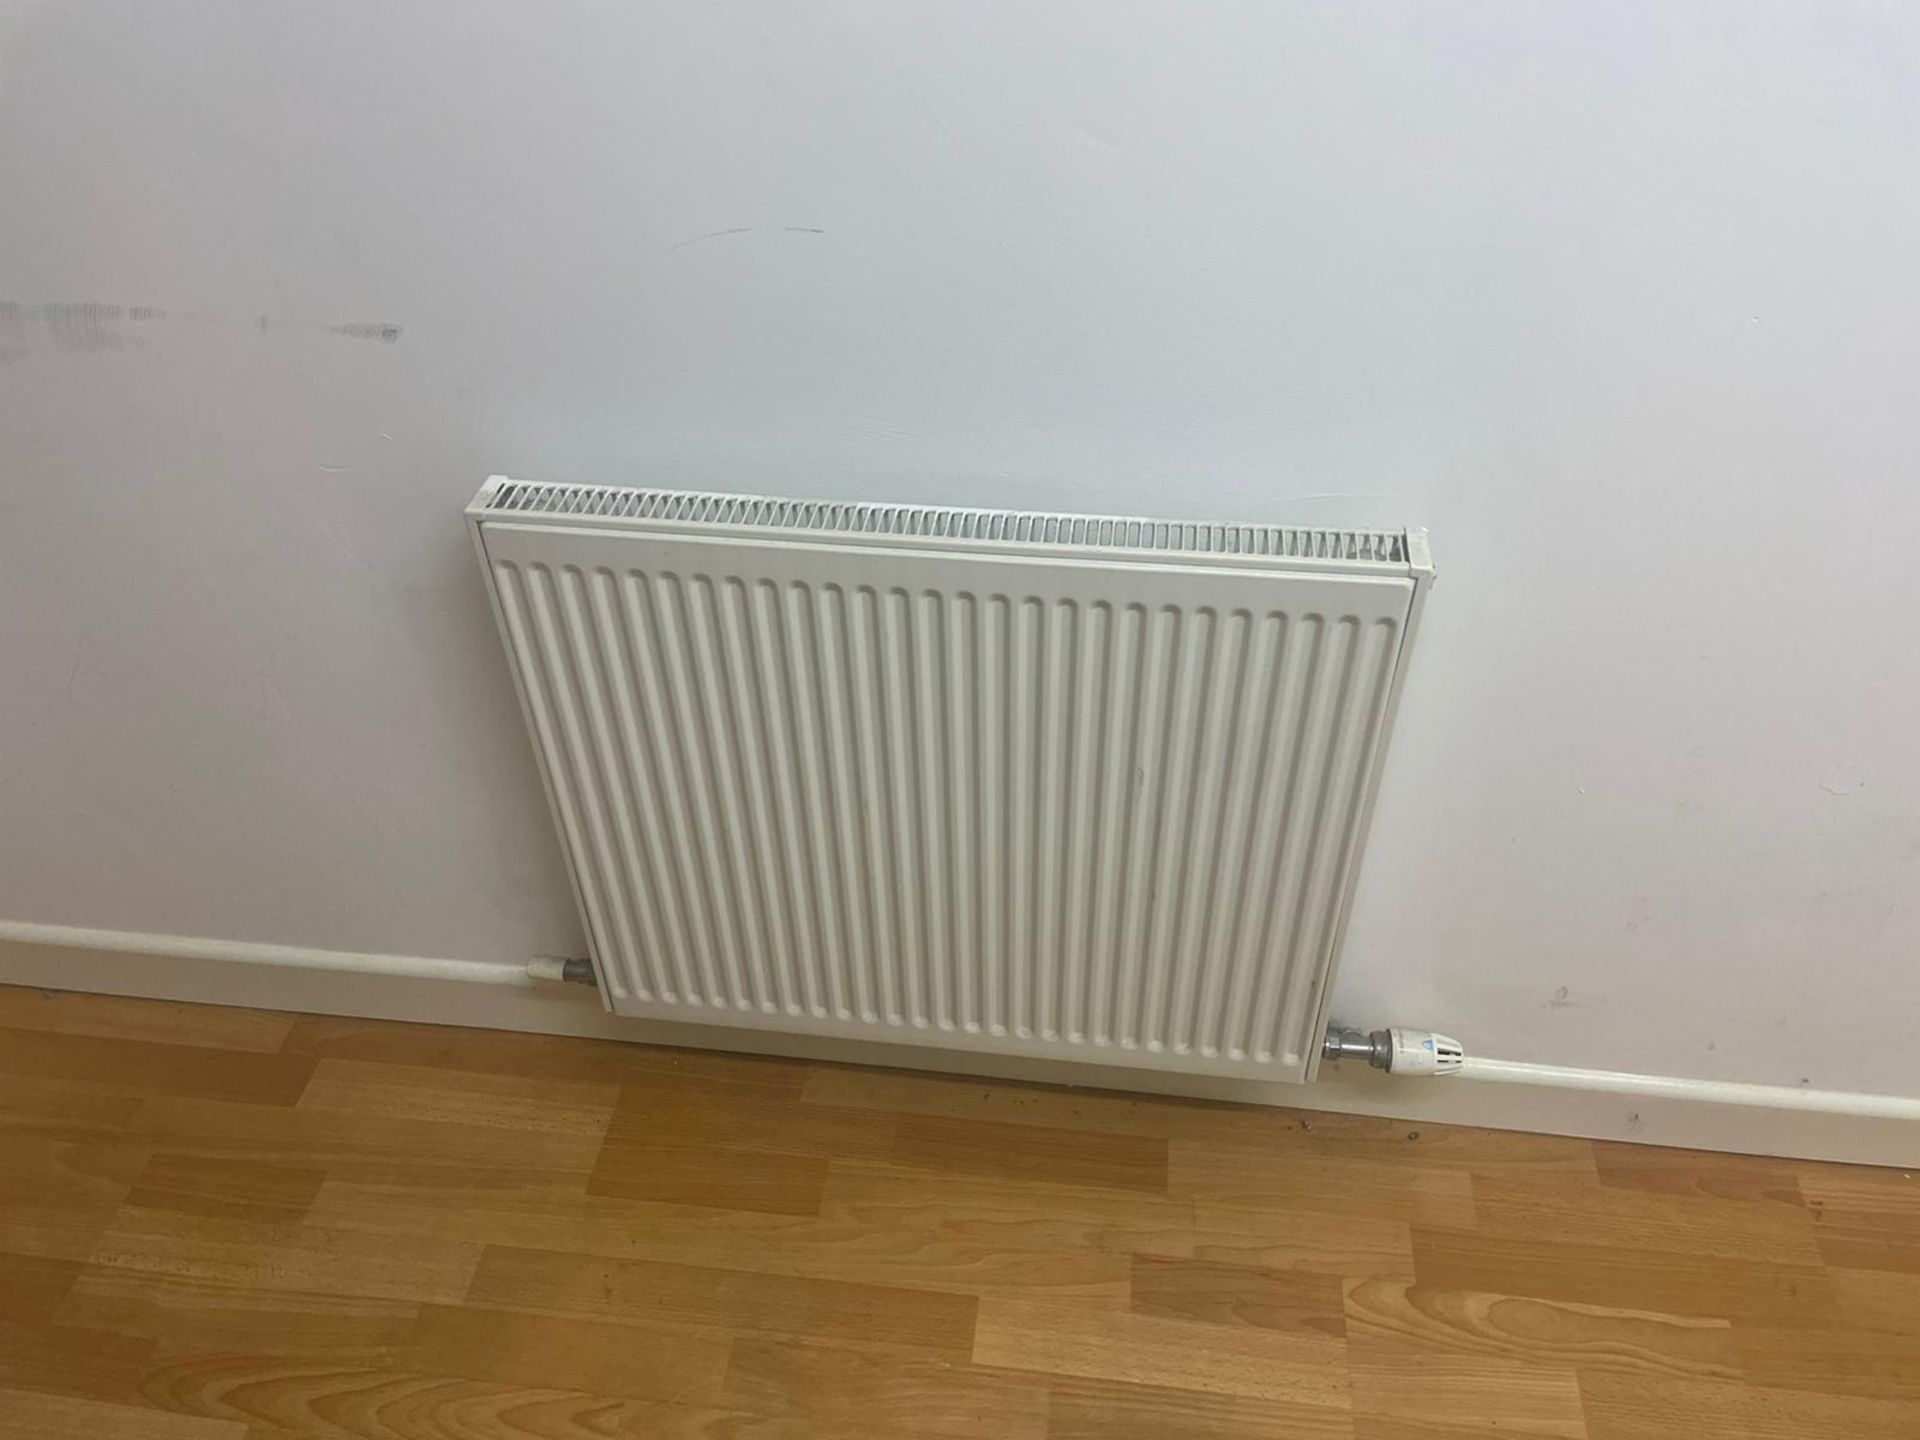 10 x Central Heating Radiators - To Be Removed From An Executive Office Environment - CL681 - Ref: - Image 3 of 4